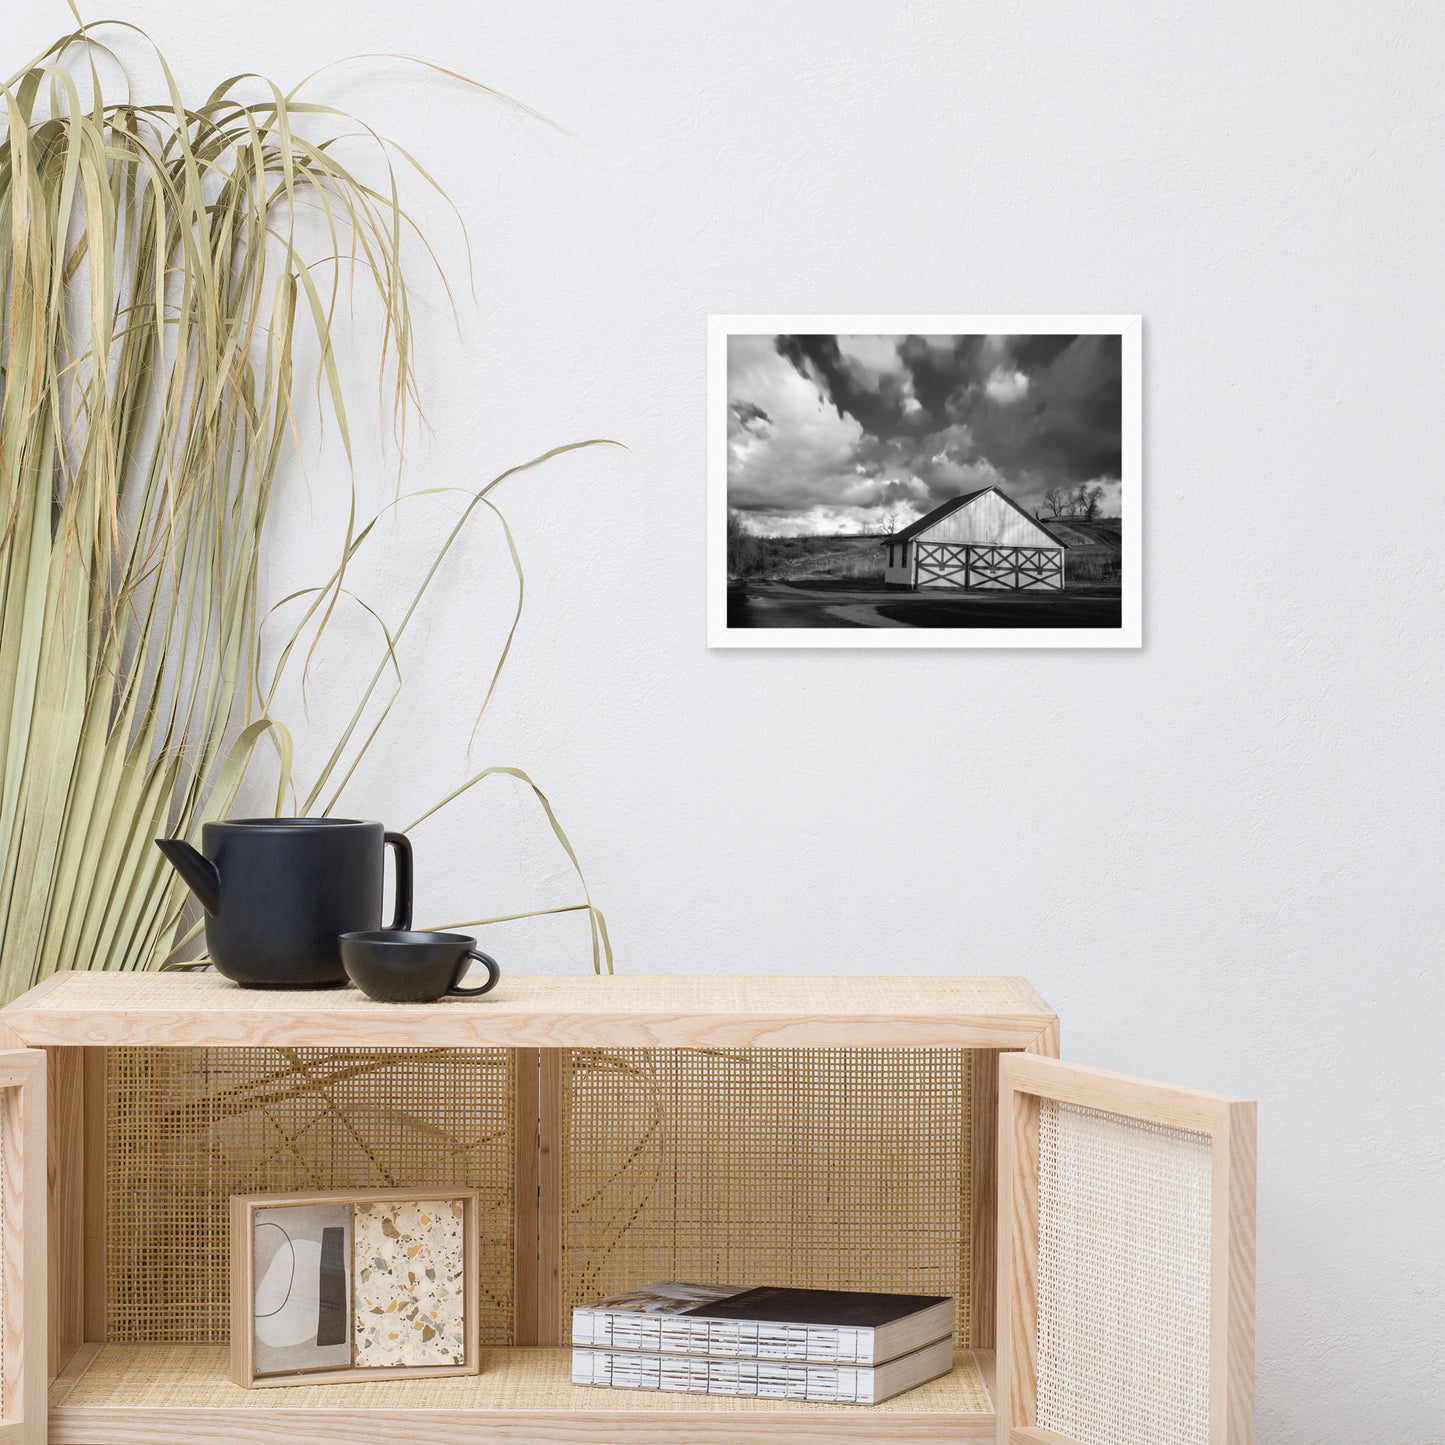 Master Bedroom Print: Aging Barn in the Morning Sun in Black and White - Rural / Country Style Landscape / Nature Photograph  Framed Wall Art Print - Wall Decor - Artwork